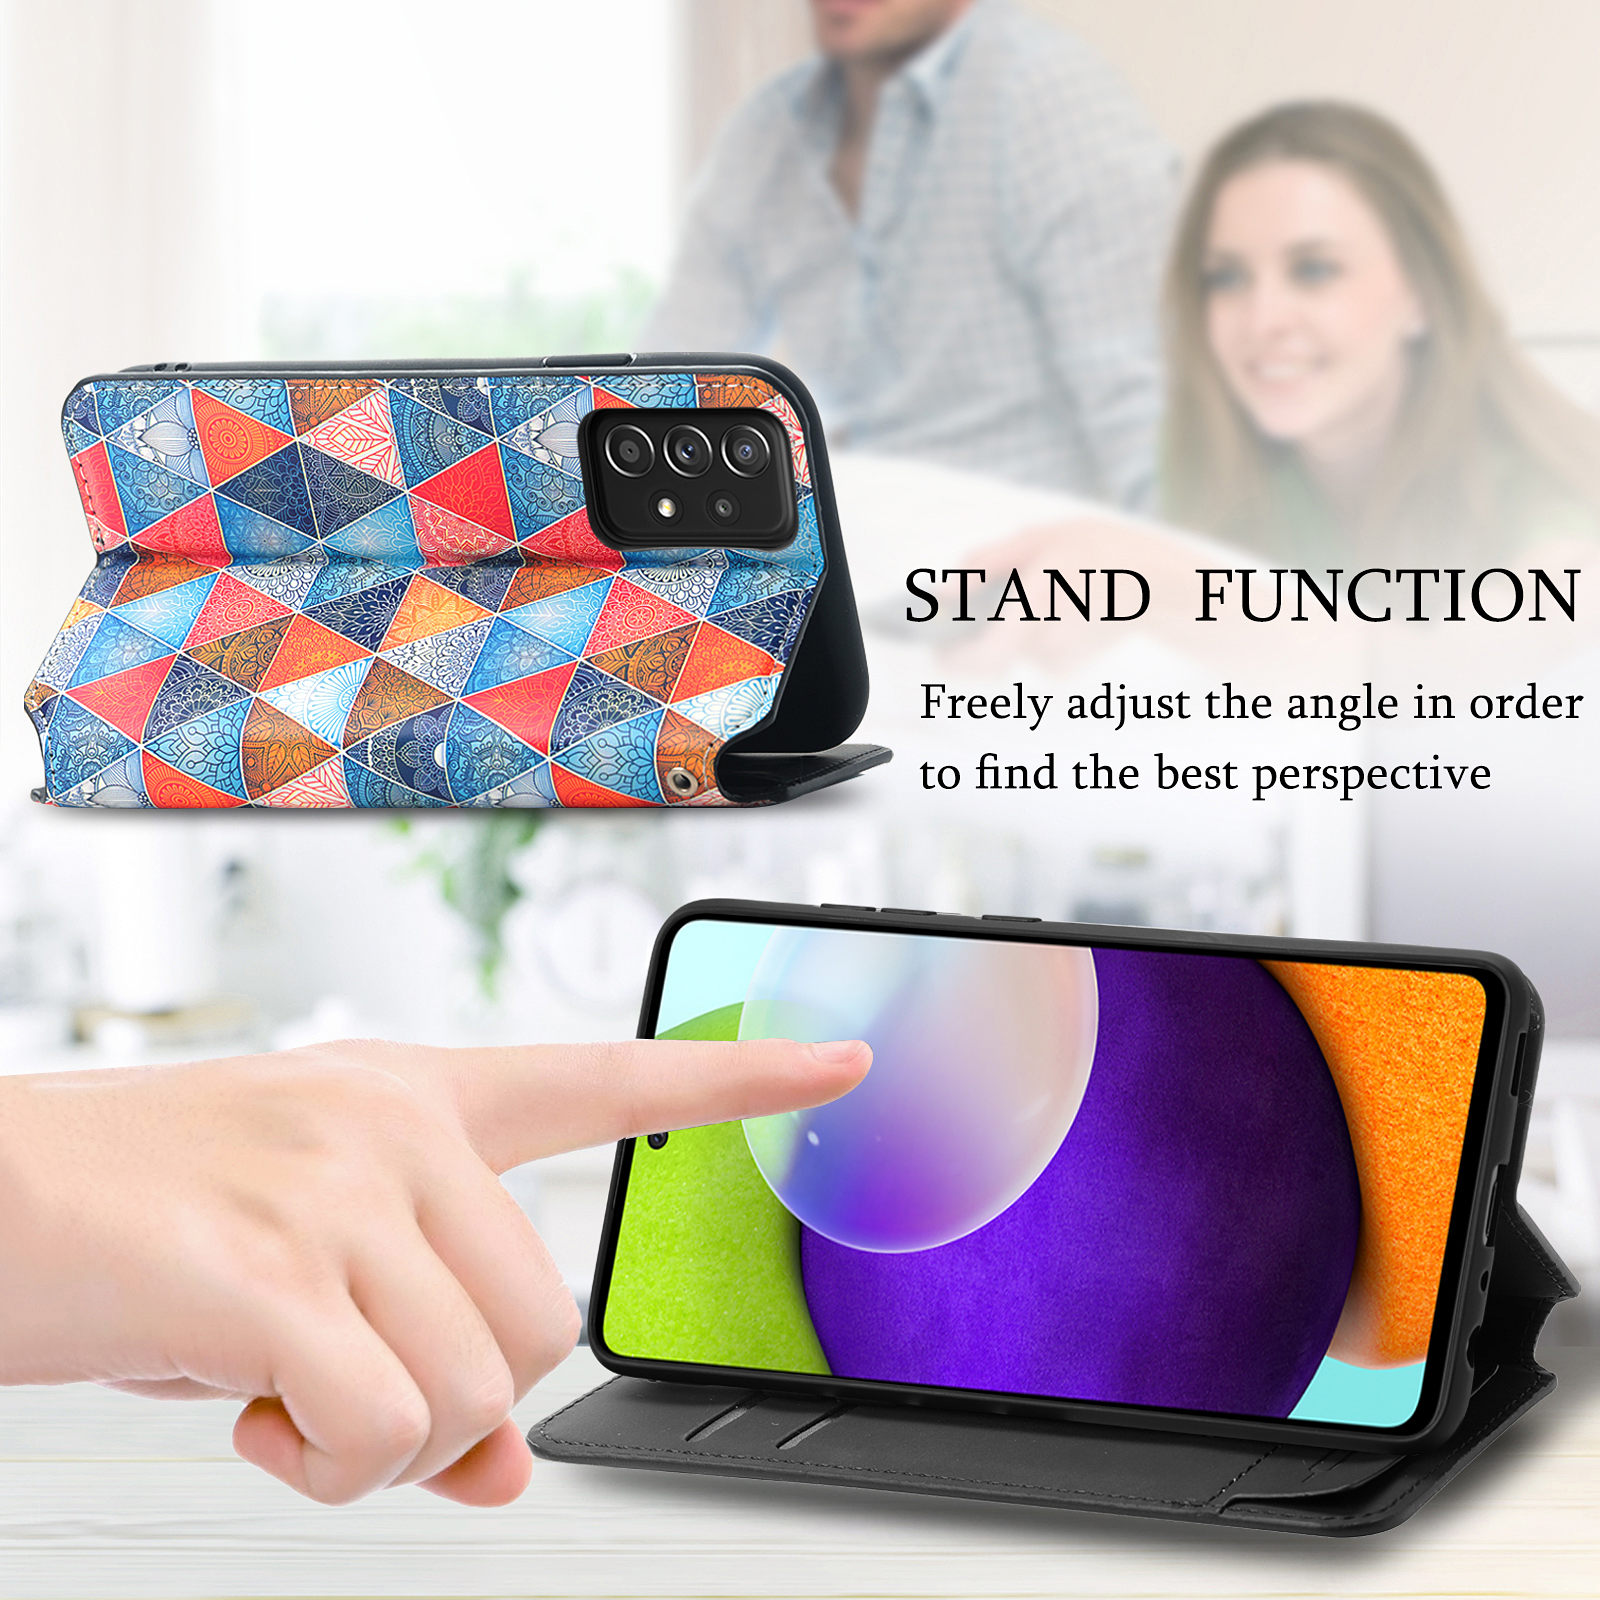 Case for Samsung Galaxy S21 Plus Case, Galaxy S21 Plus Case Wallet Case PU Leather and Hard PC RFID Blocking Slim Durable Protective Phone Case Cover For Samsung Galaxy S21+,Mandala - image 4 of 9